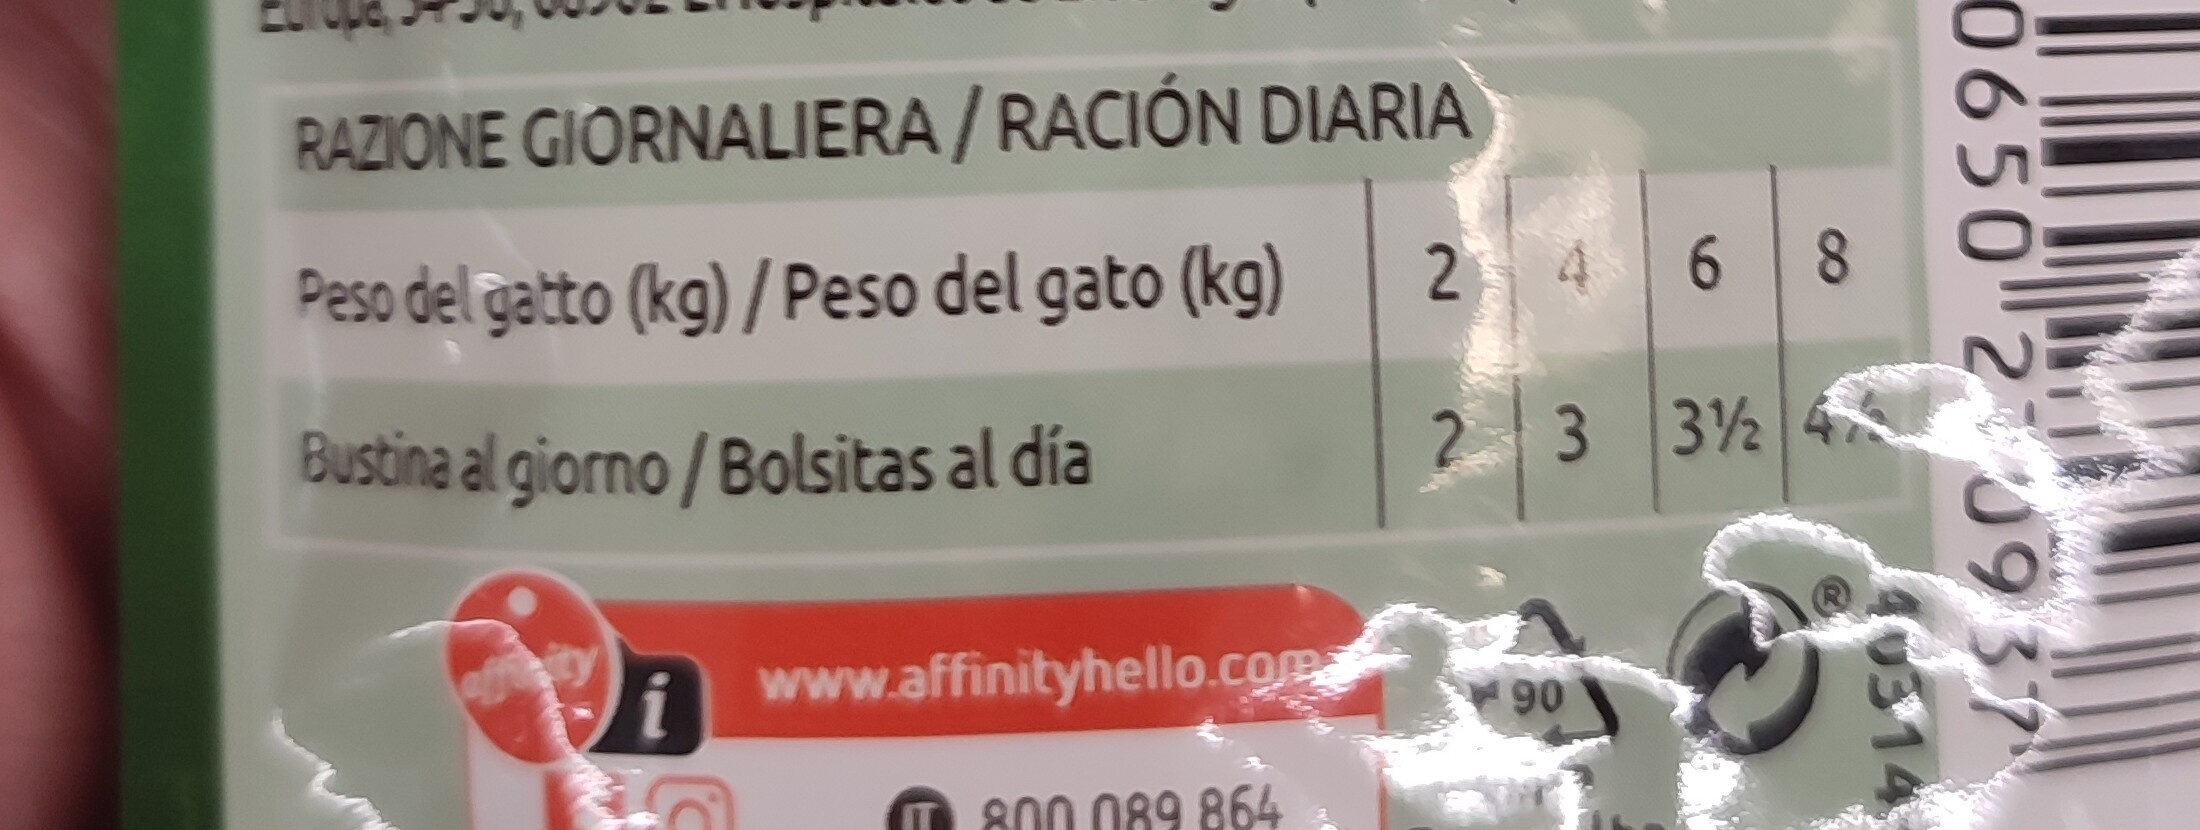  - Nutrition facts - it